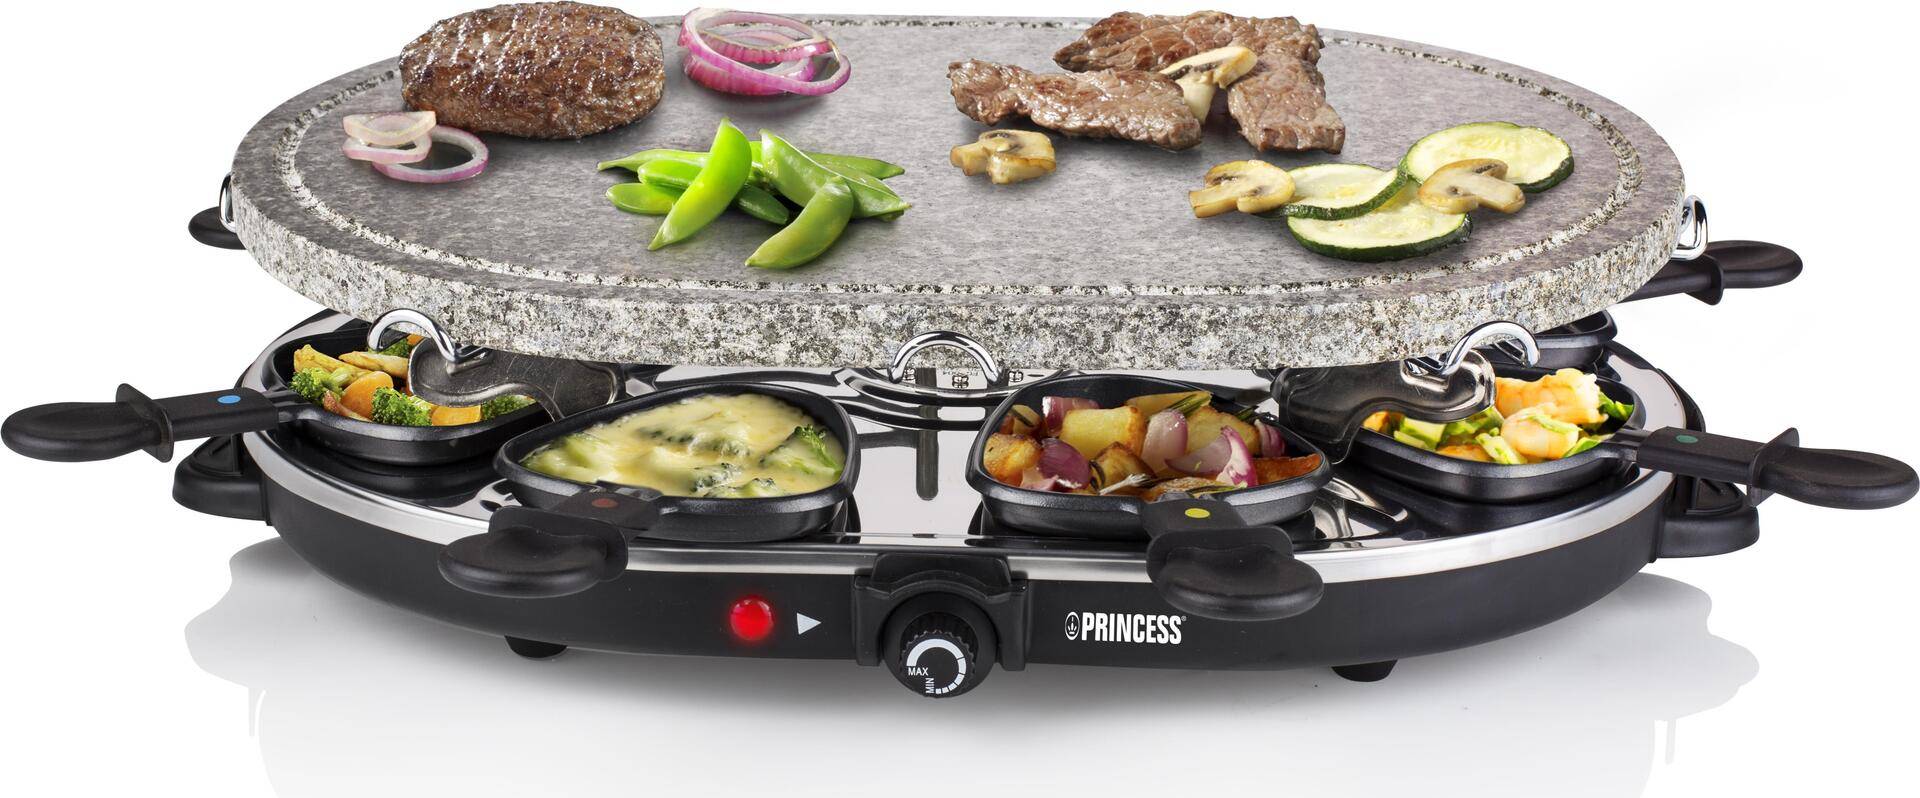 Princess 162720 Raclette 8 Oval Stone Grill Party - 1200 W - 220-240 V - 7,39 kg - 186 mm - 490 mm - 318 mm (162720) von Princess